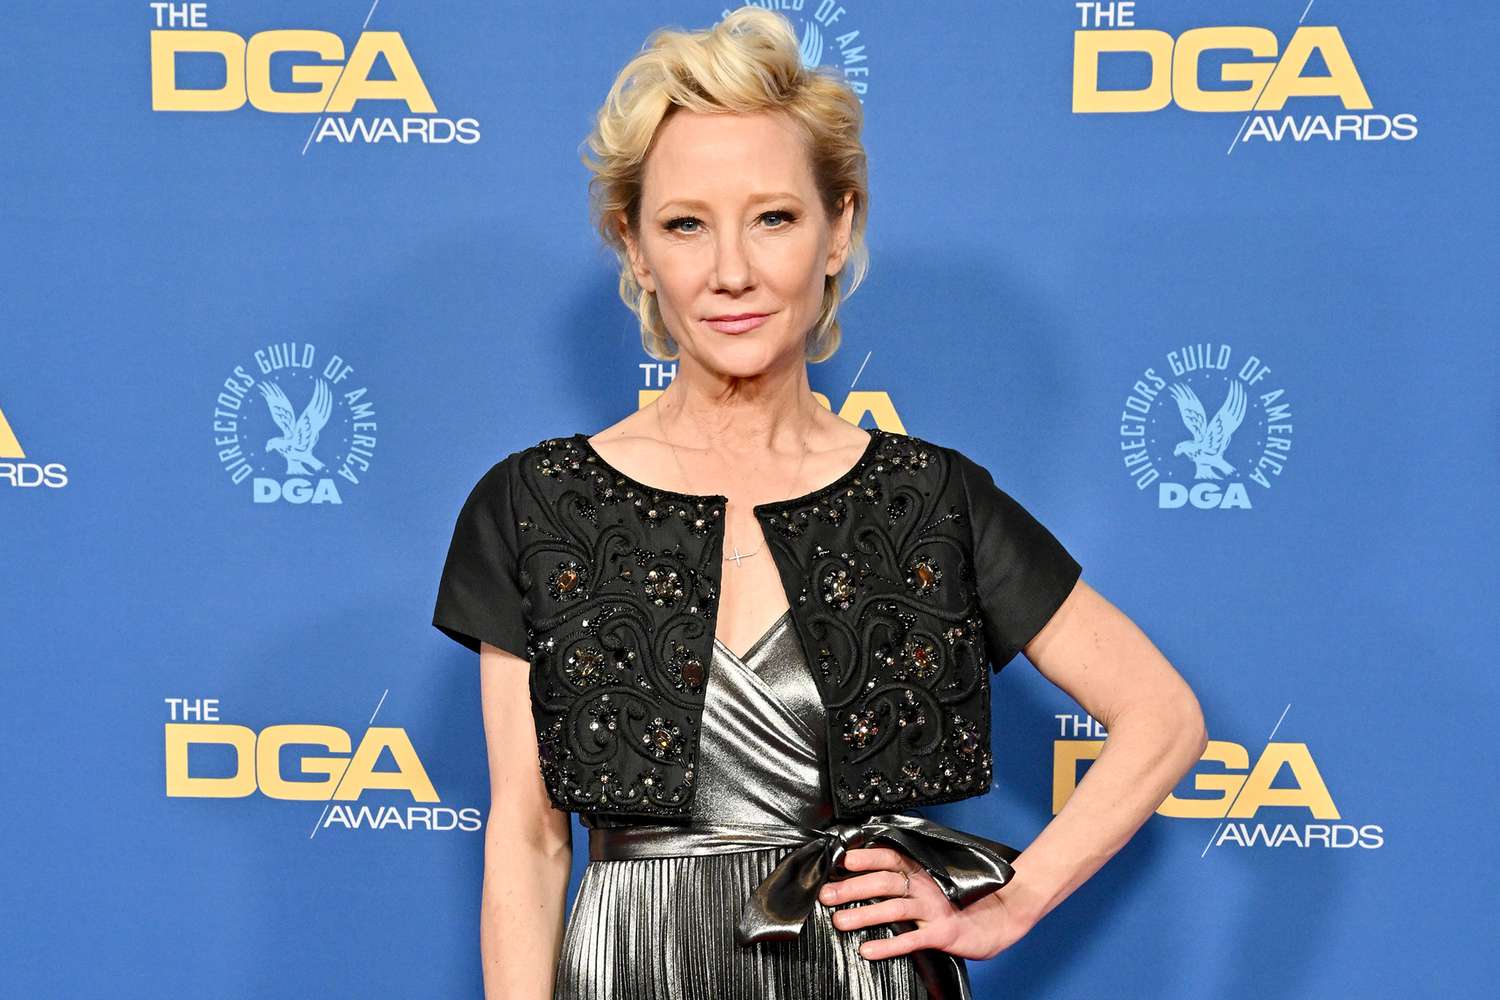 Anne Heche reportedly hospitalized after fiery car crash